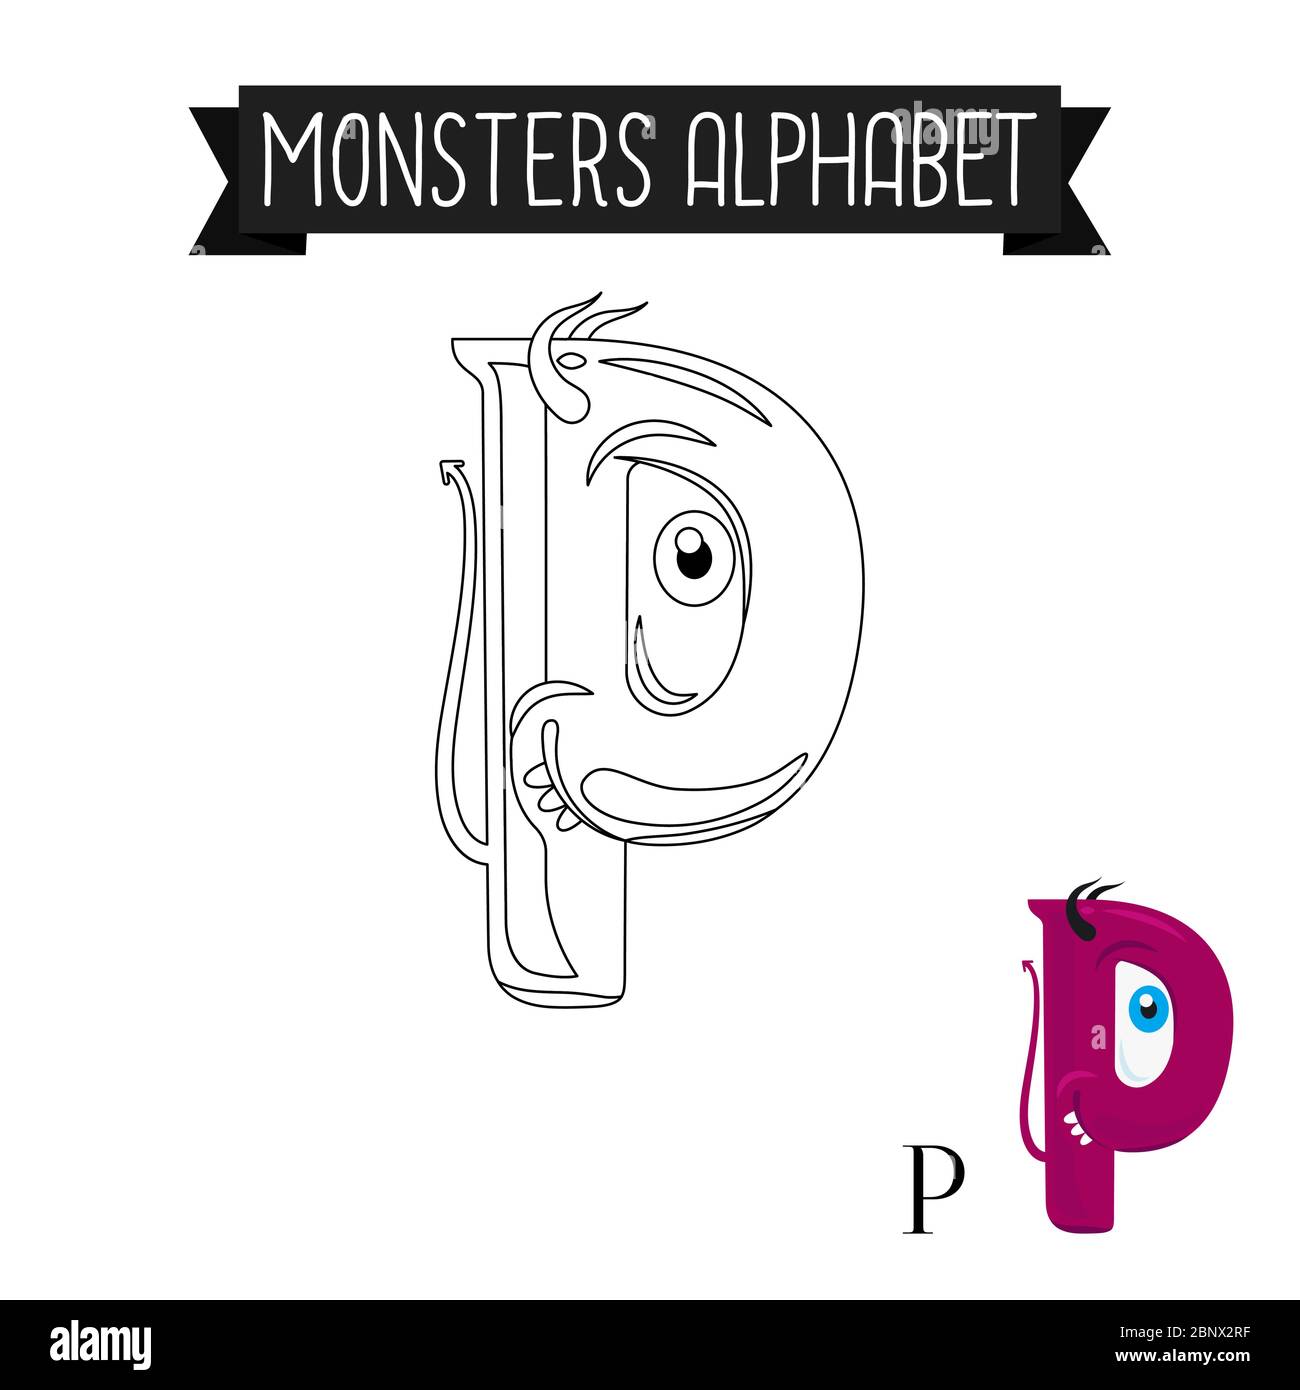 Alphabet Lore Monster Letters Fun Drawing and Coloring Activity for Kids